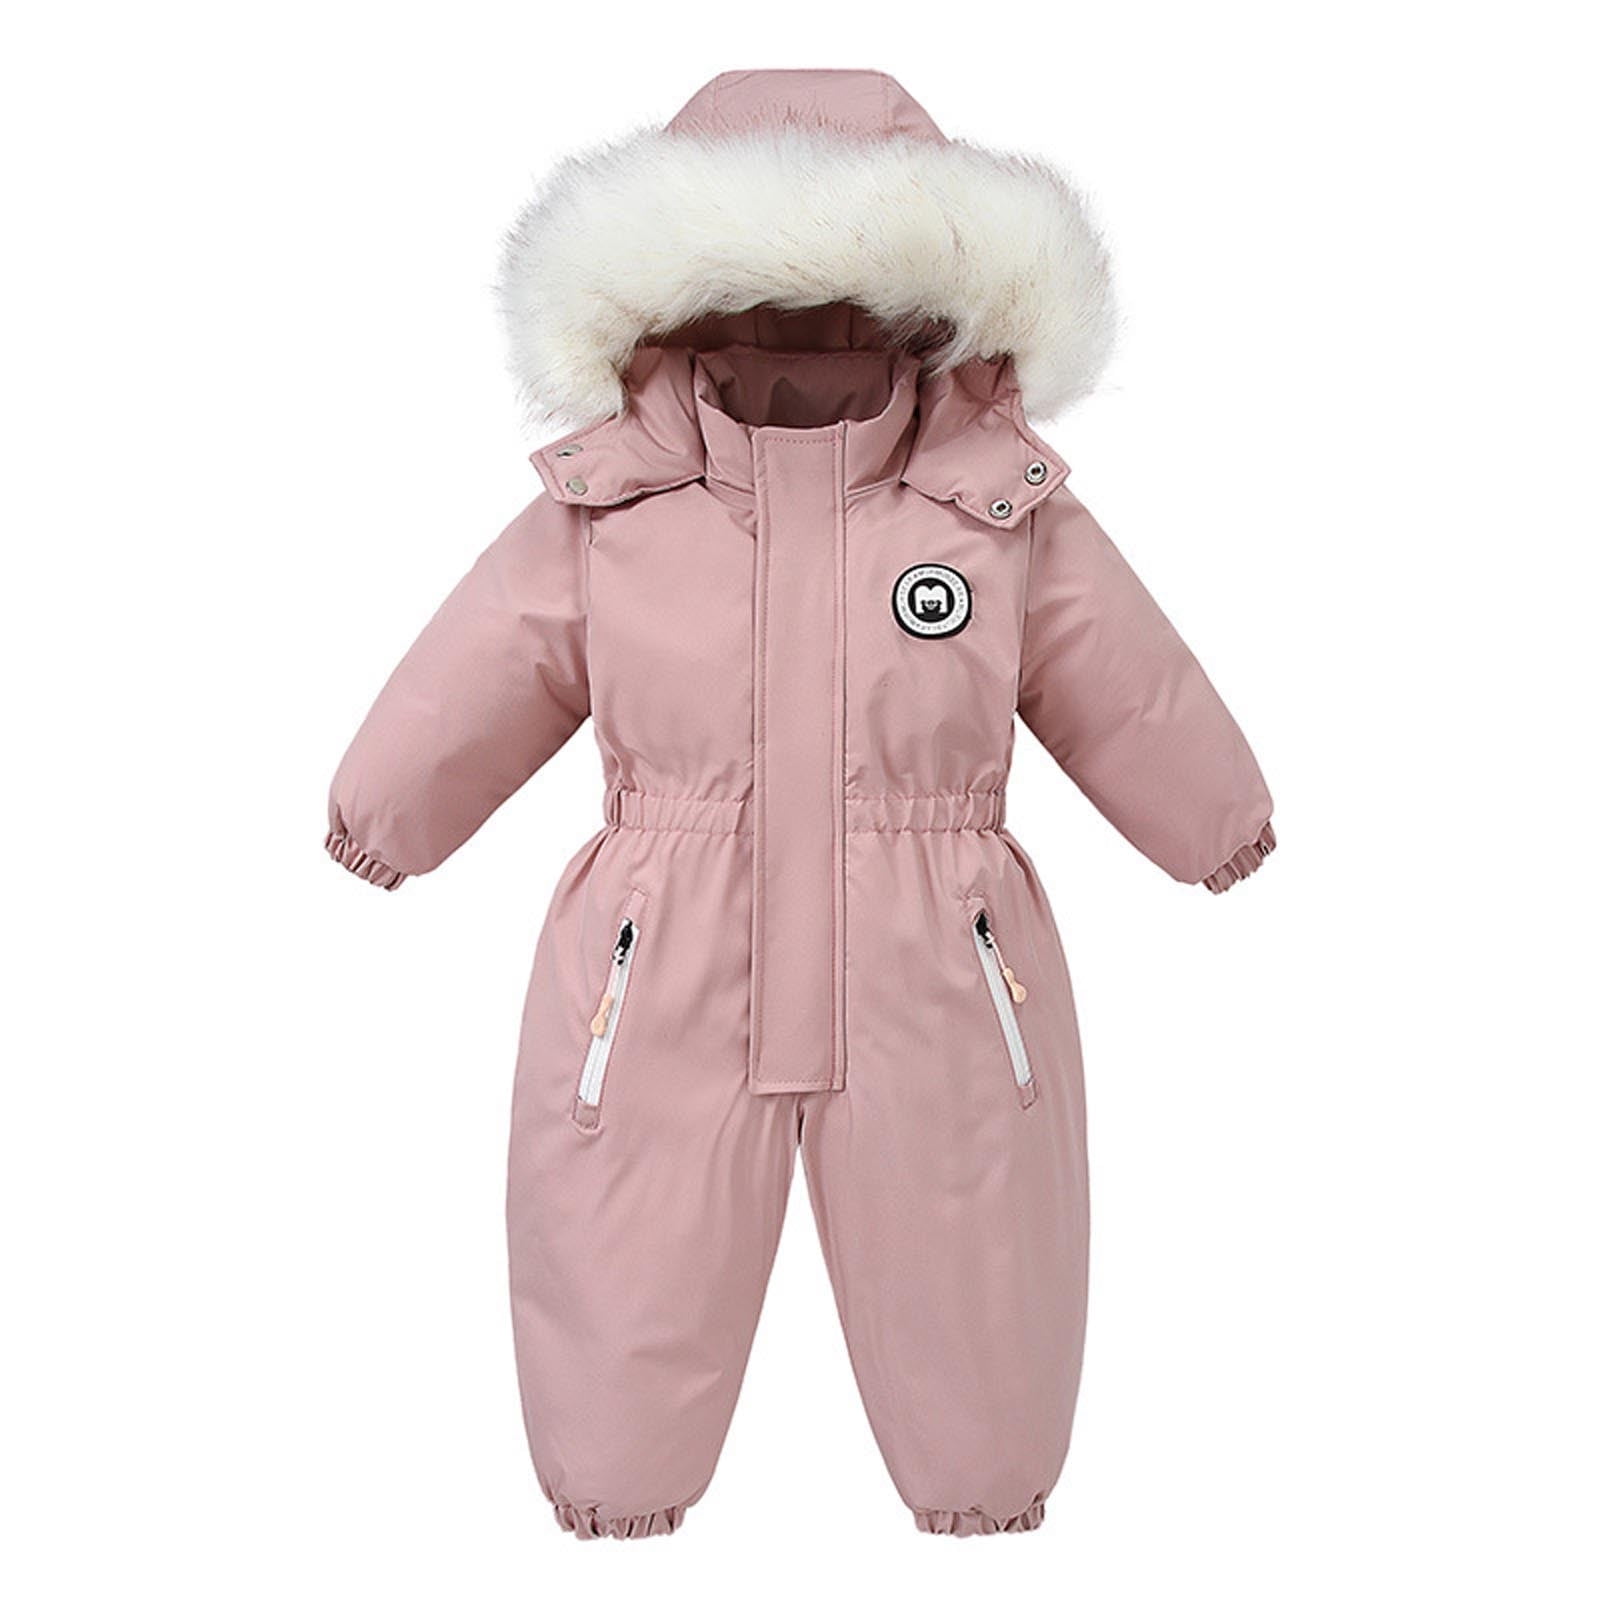 VerPetridure Baby Girl Rompers 12-18 Months Girls Boys One-piece Snowsuits  Overalls Ski Suits Winter Waterproof Coats Jumpsuits for Baby Toddler 